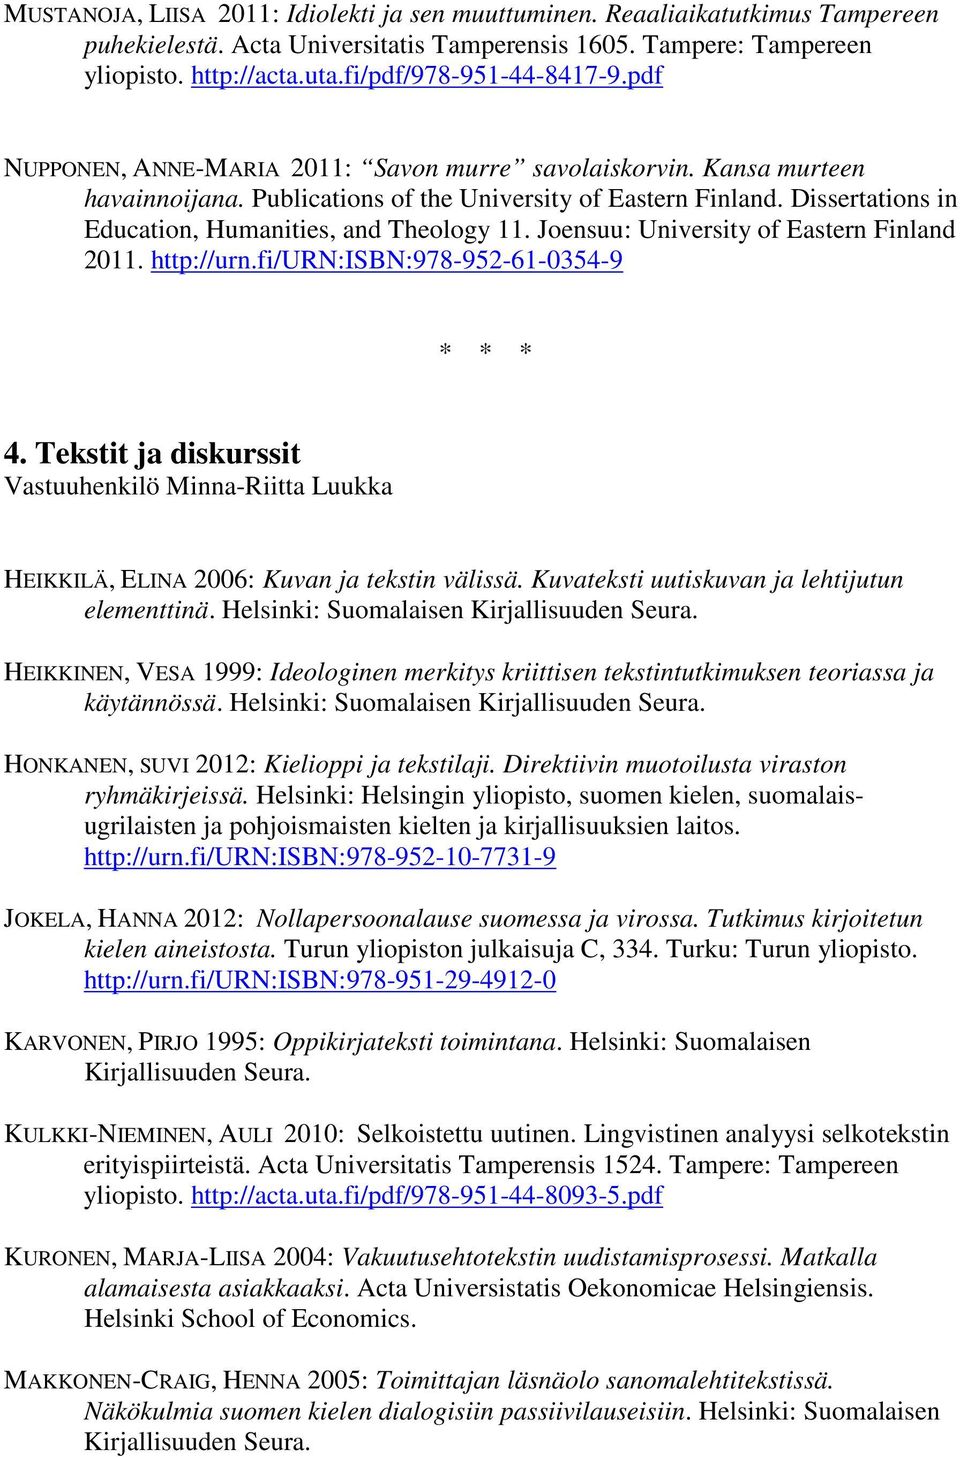 Dissertations in Education, Humanities, and Theology 11. Joensuu: University of Eastern Finland 2011. http://urn.fi/urn:isbn:978-952-61-0354-9 4.